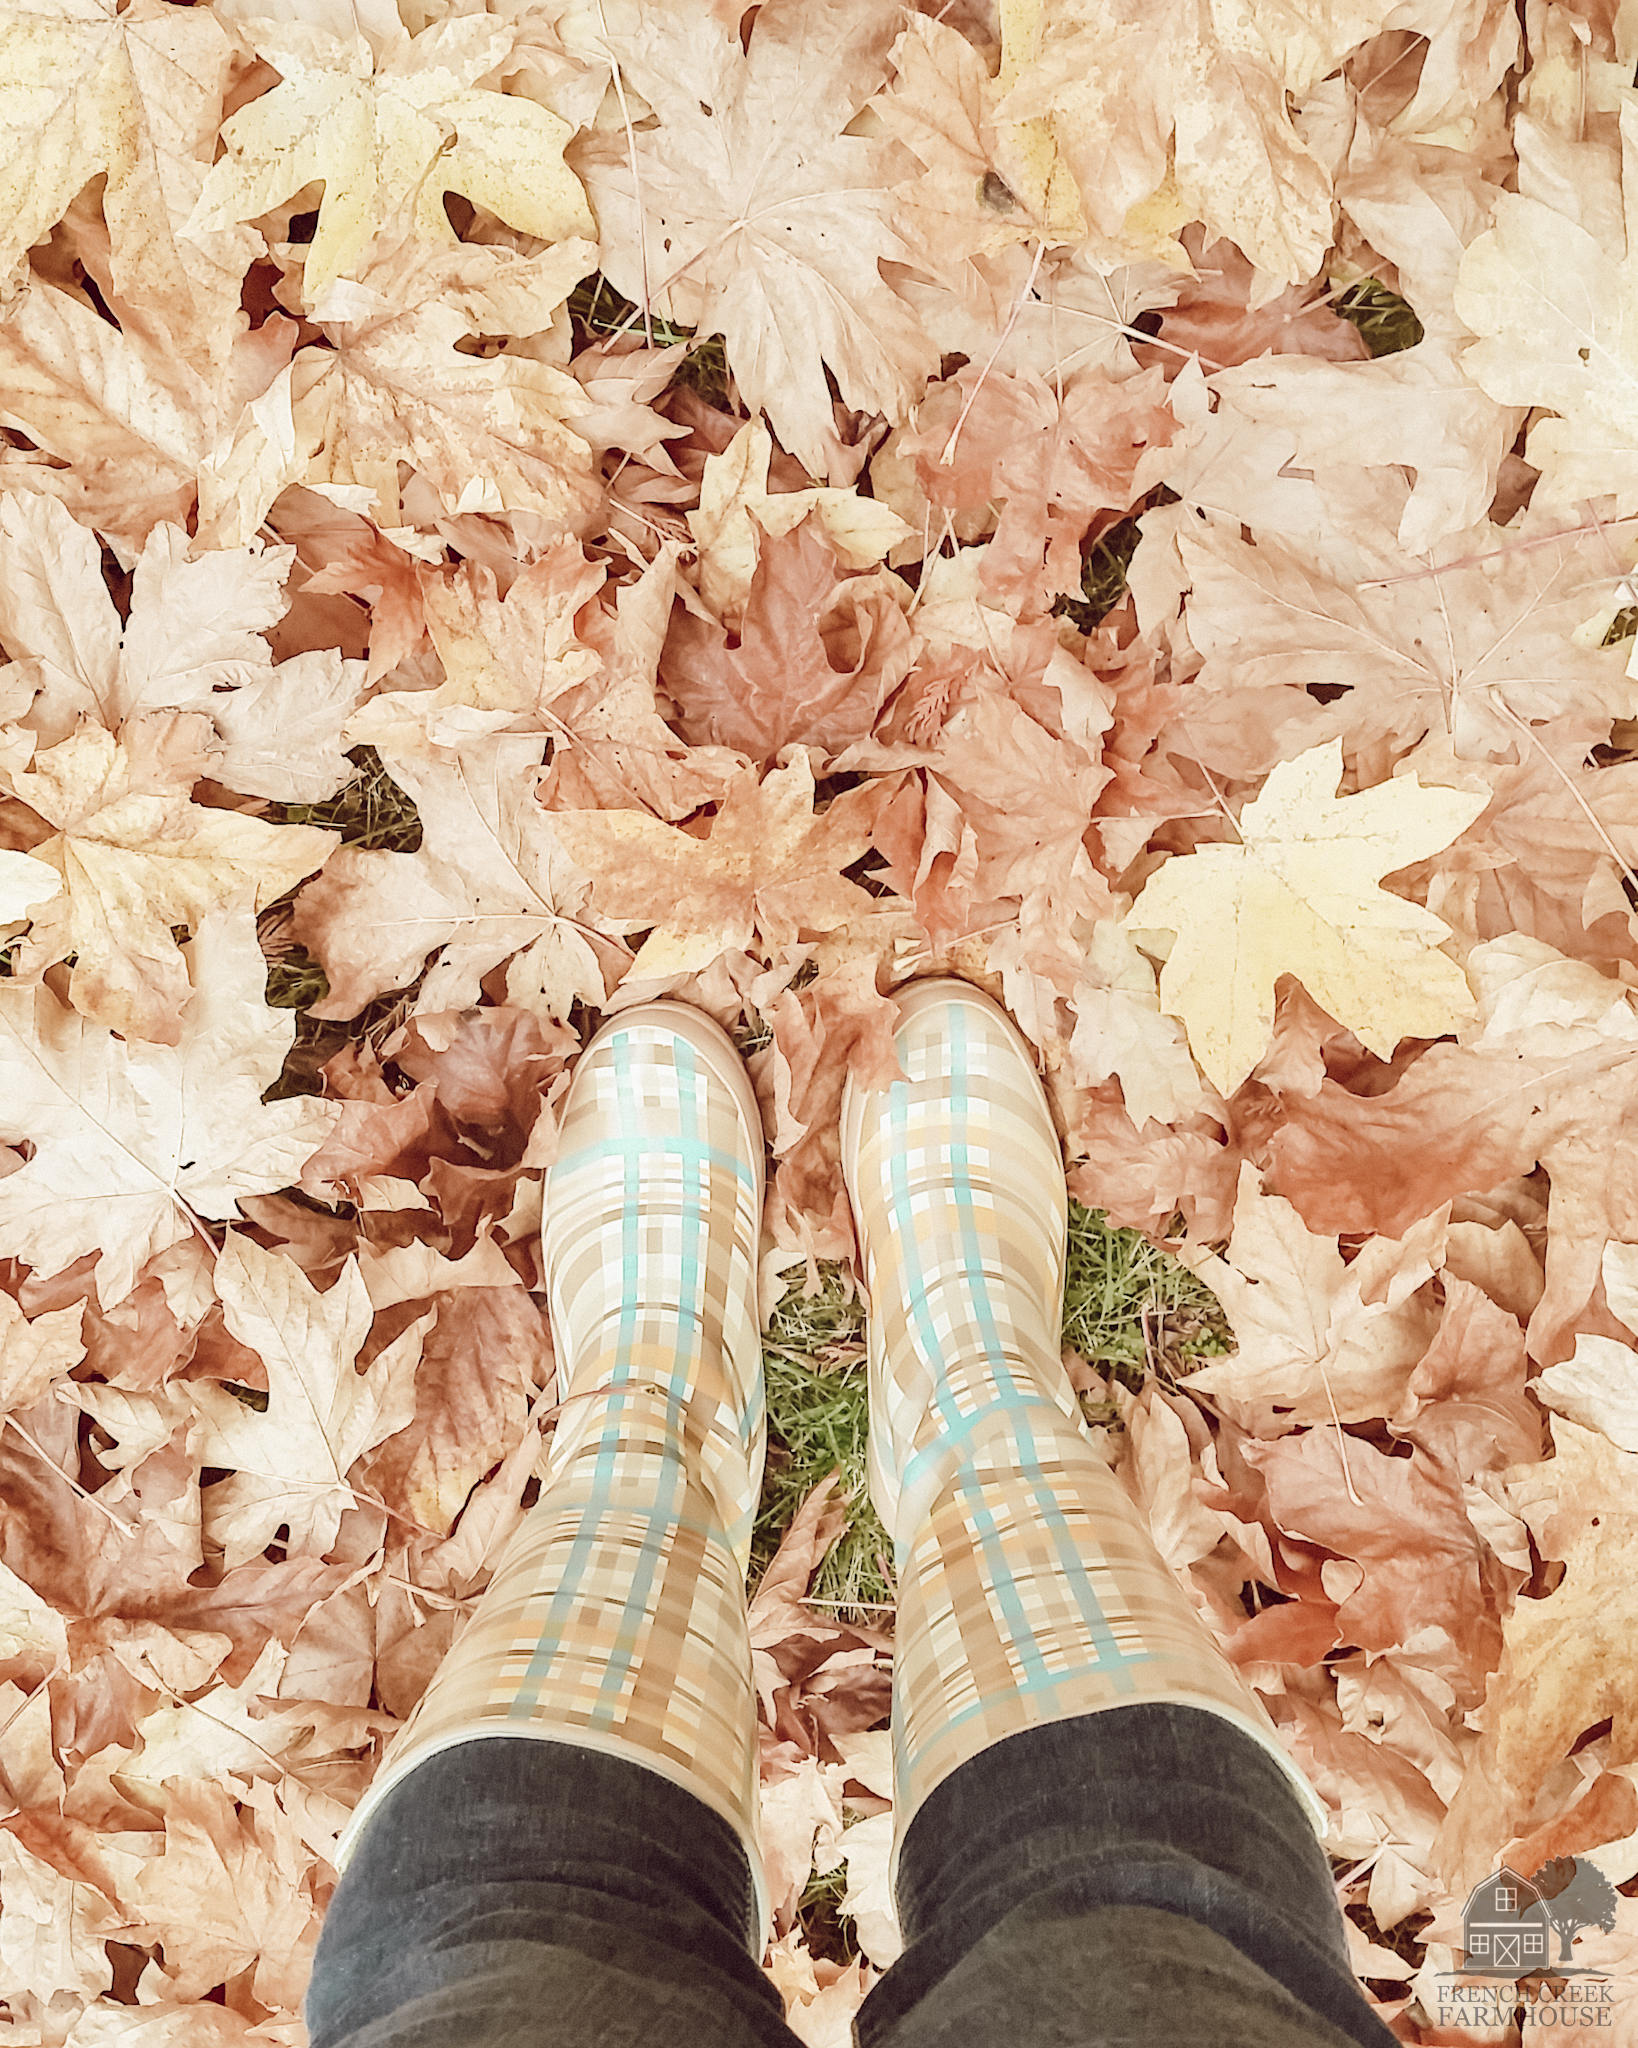 Rainboots standing in autumn leaves